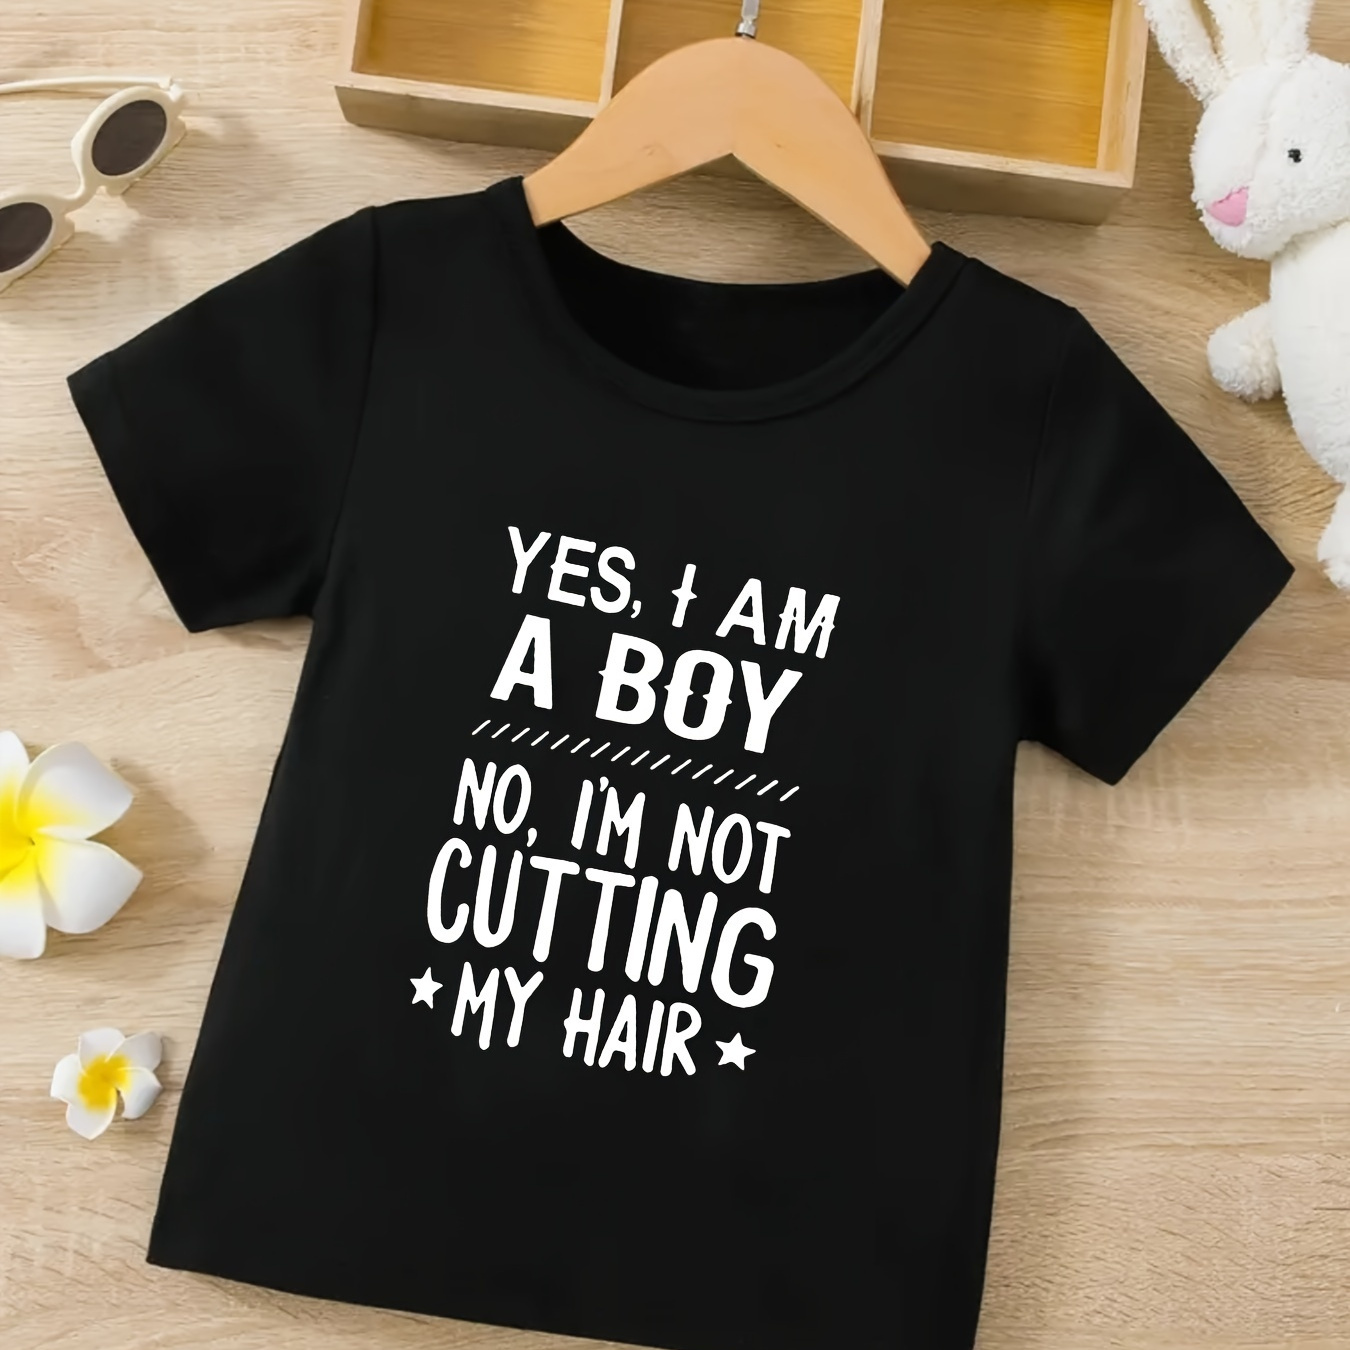 

Boys' Casual Short-sleeve T-shirt, "yes, I Am A Boy No, I'm Not Cutting My Hair" Fun Letter Print, Round Neck, Fashionable Spring/summer Tee, Gift For Boys